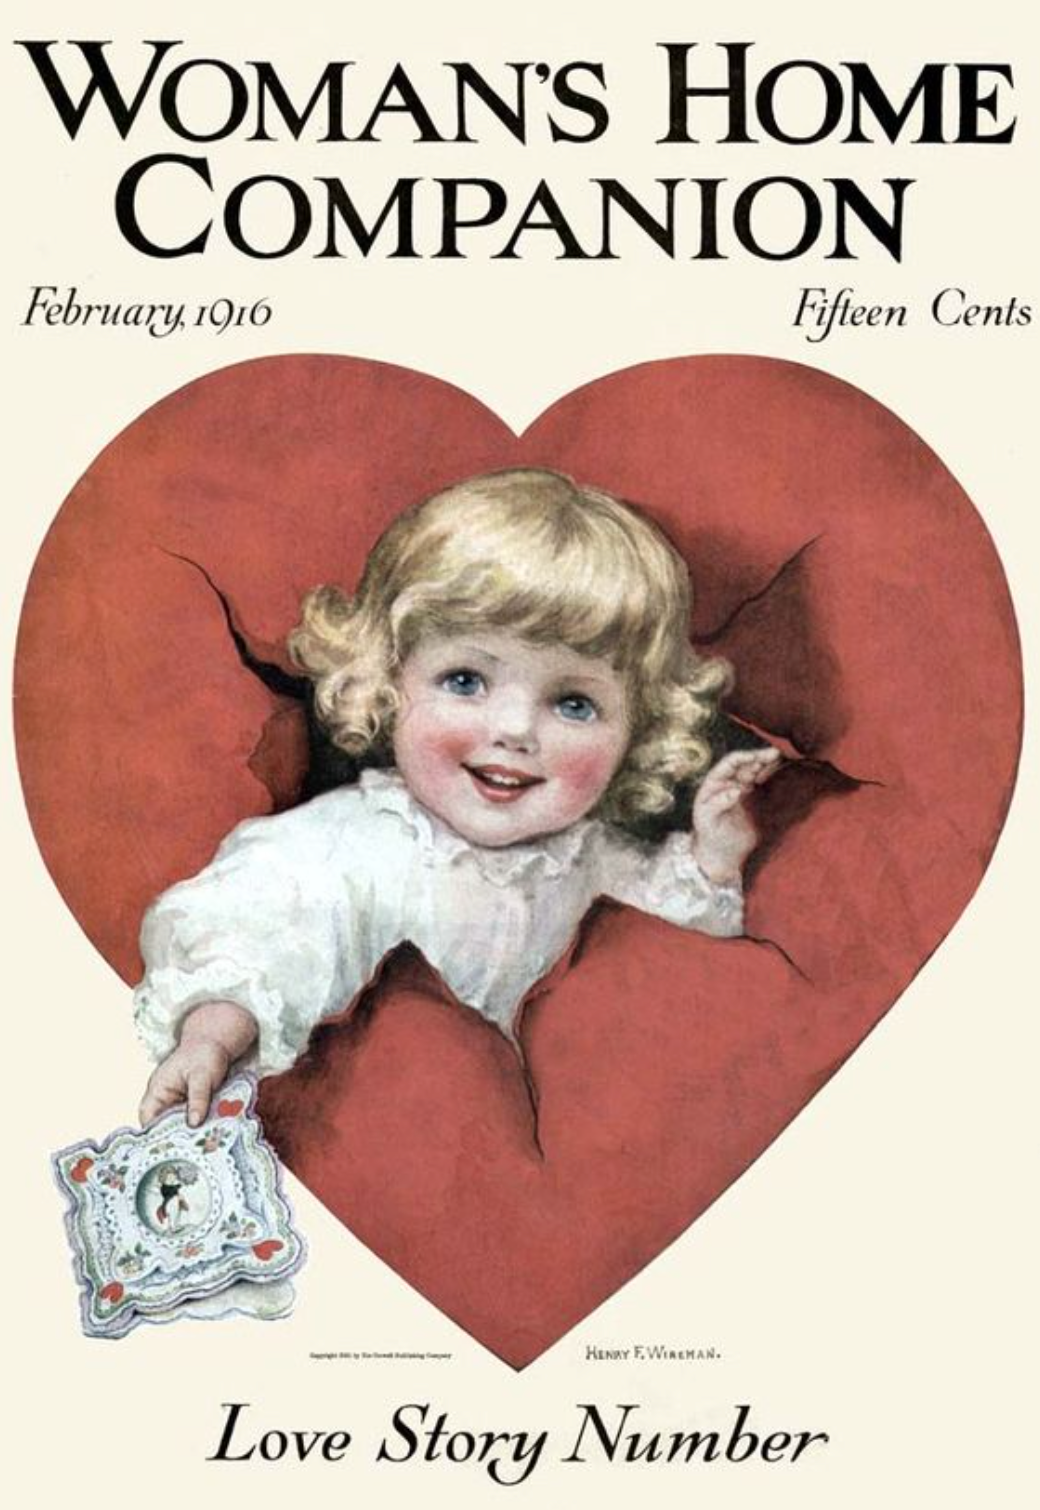 Baby Offers a Valentine - Valentine's Day Greeting Card